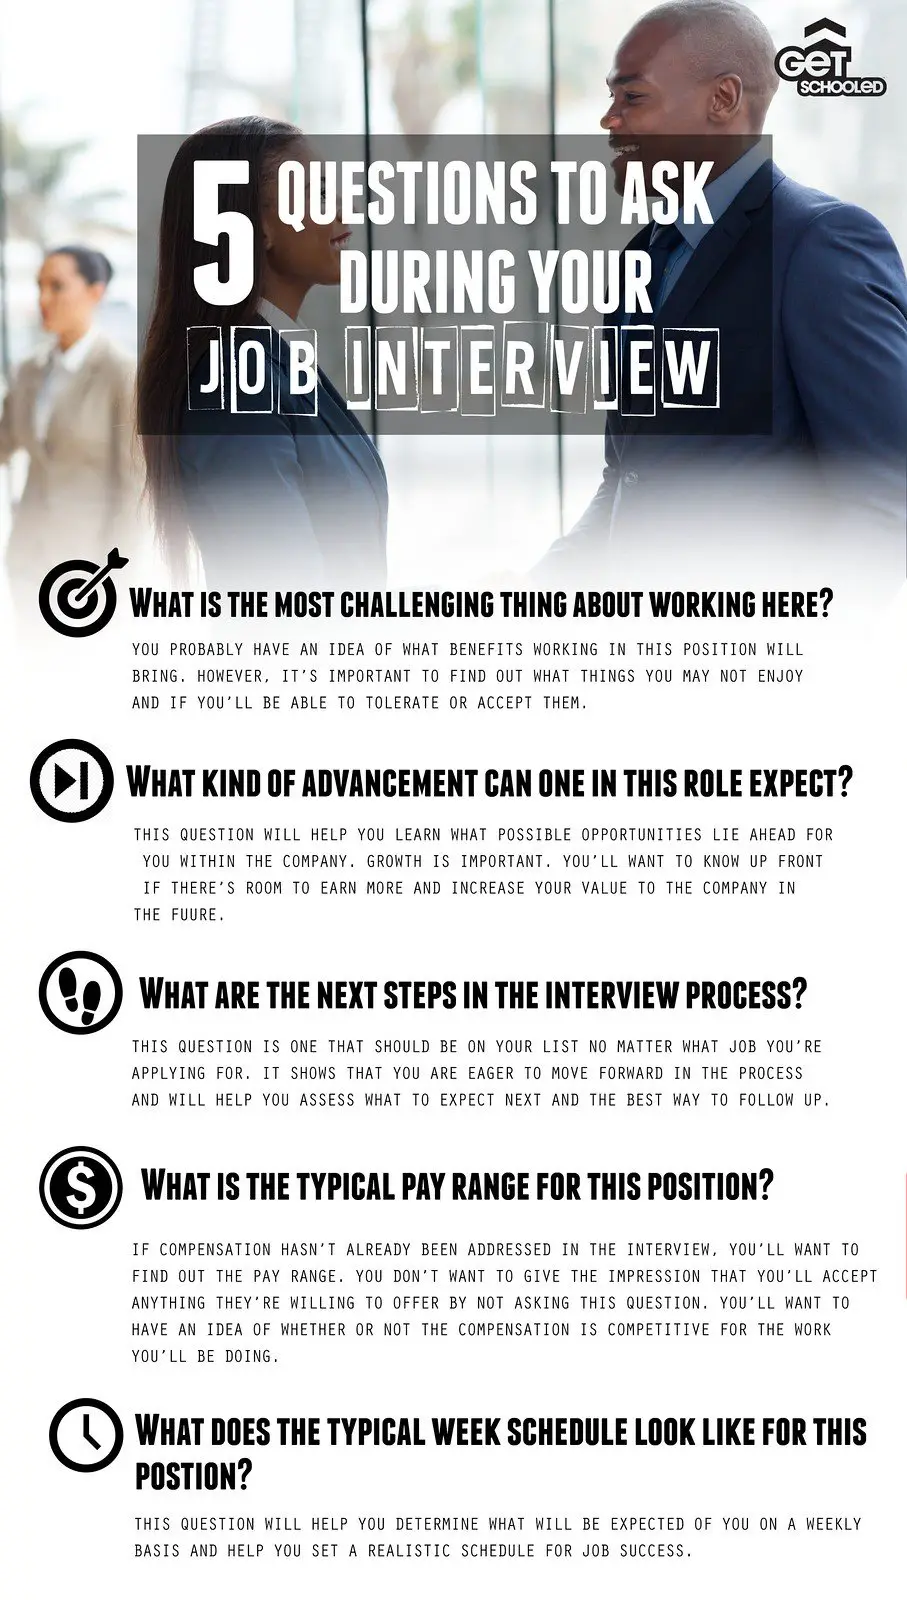 5 Questions To Ask During Your Job Interview